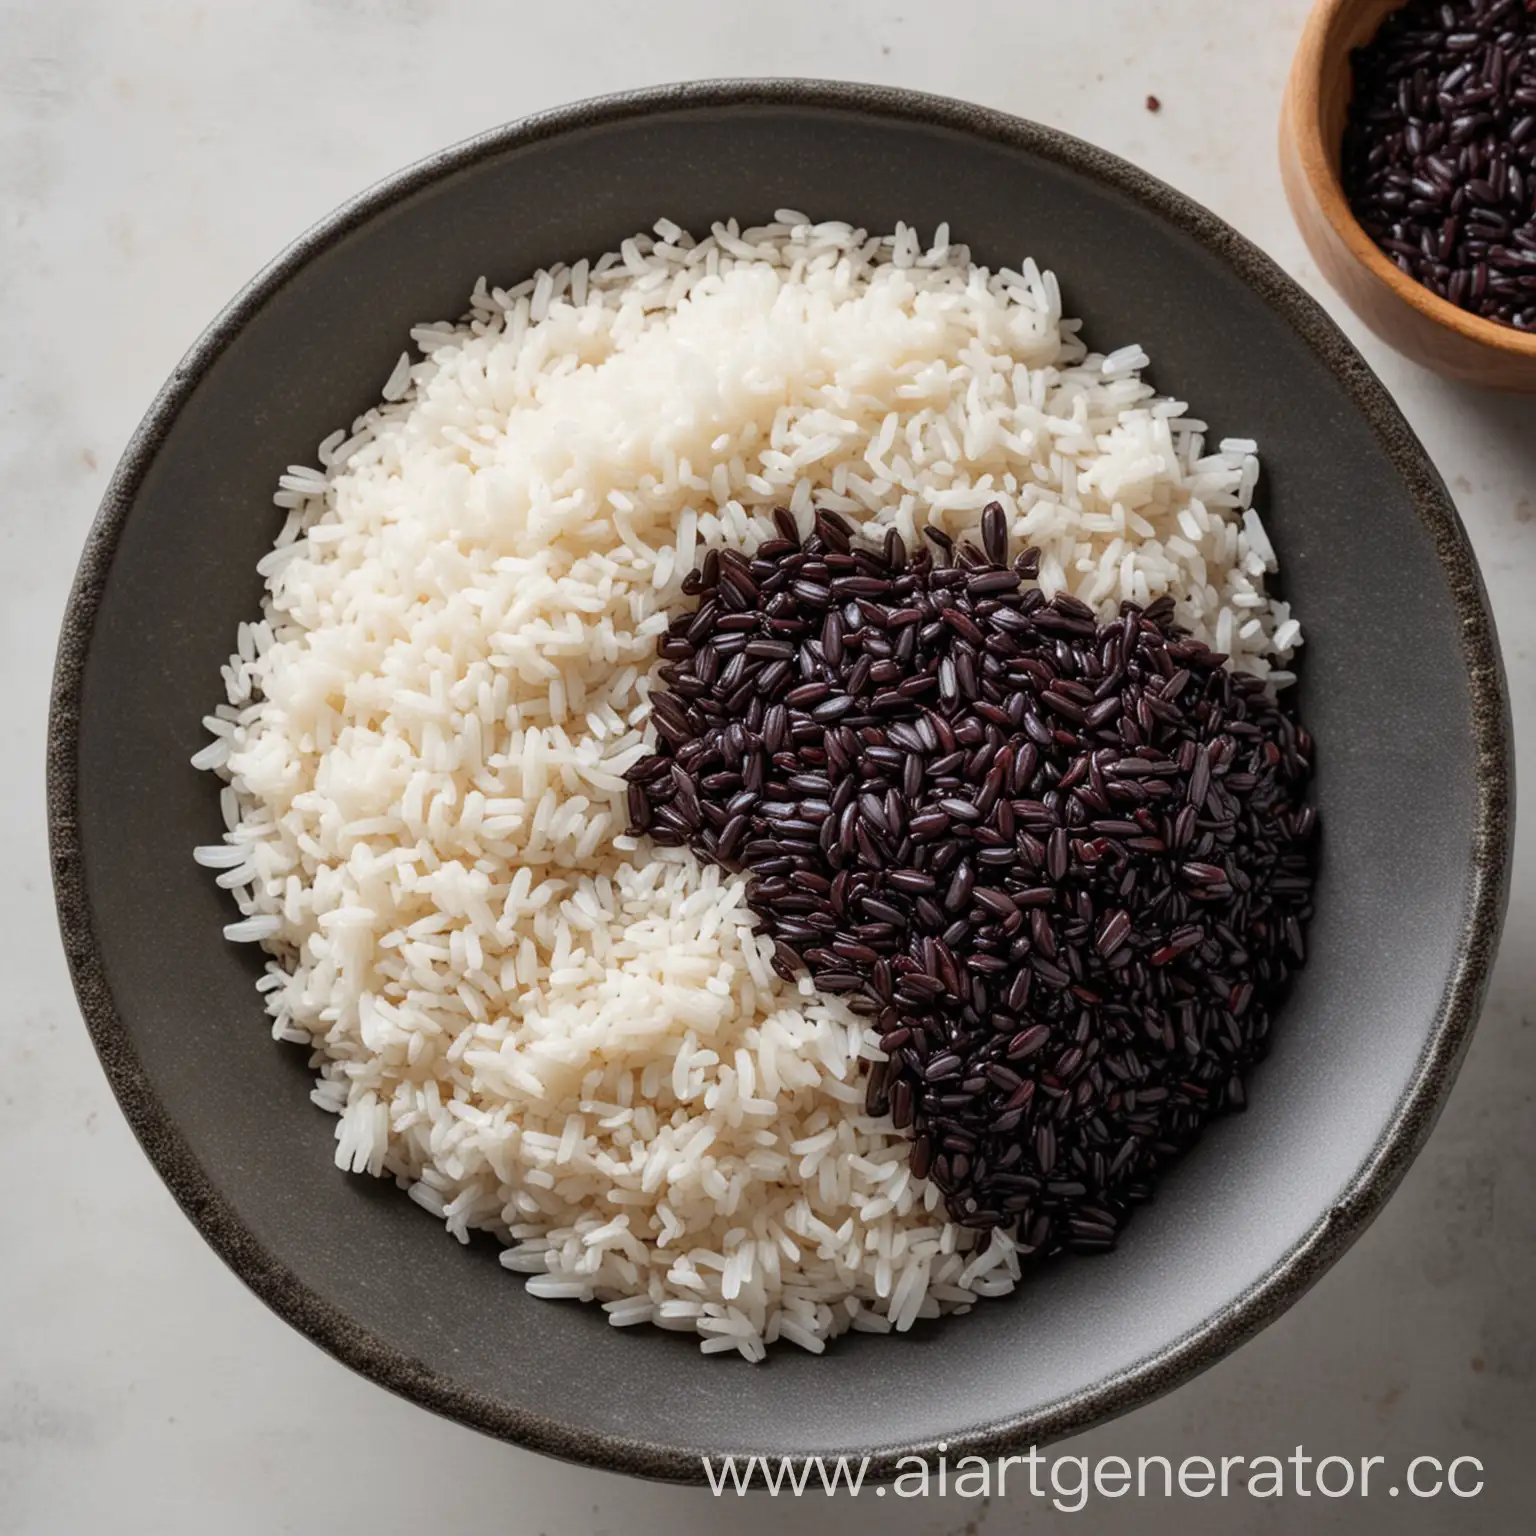 Bowl-of-Black-and-White-Rice-Mix-Contrasting-Grains-in-a-Ceramic-Dish